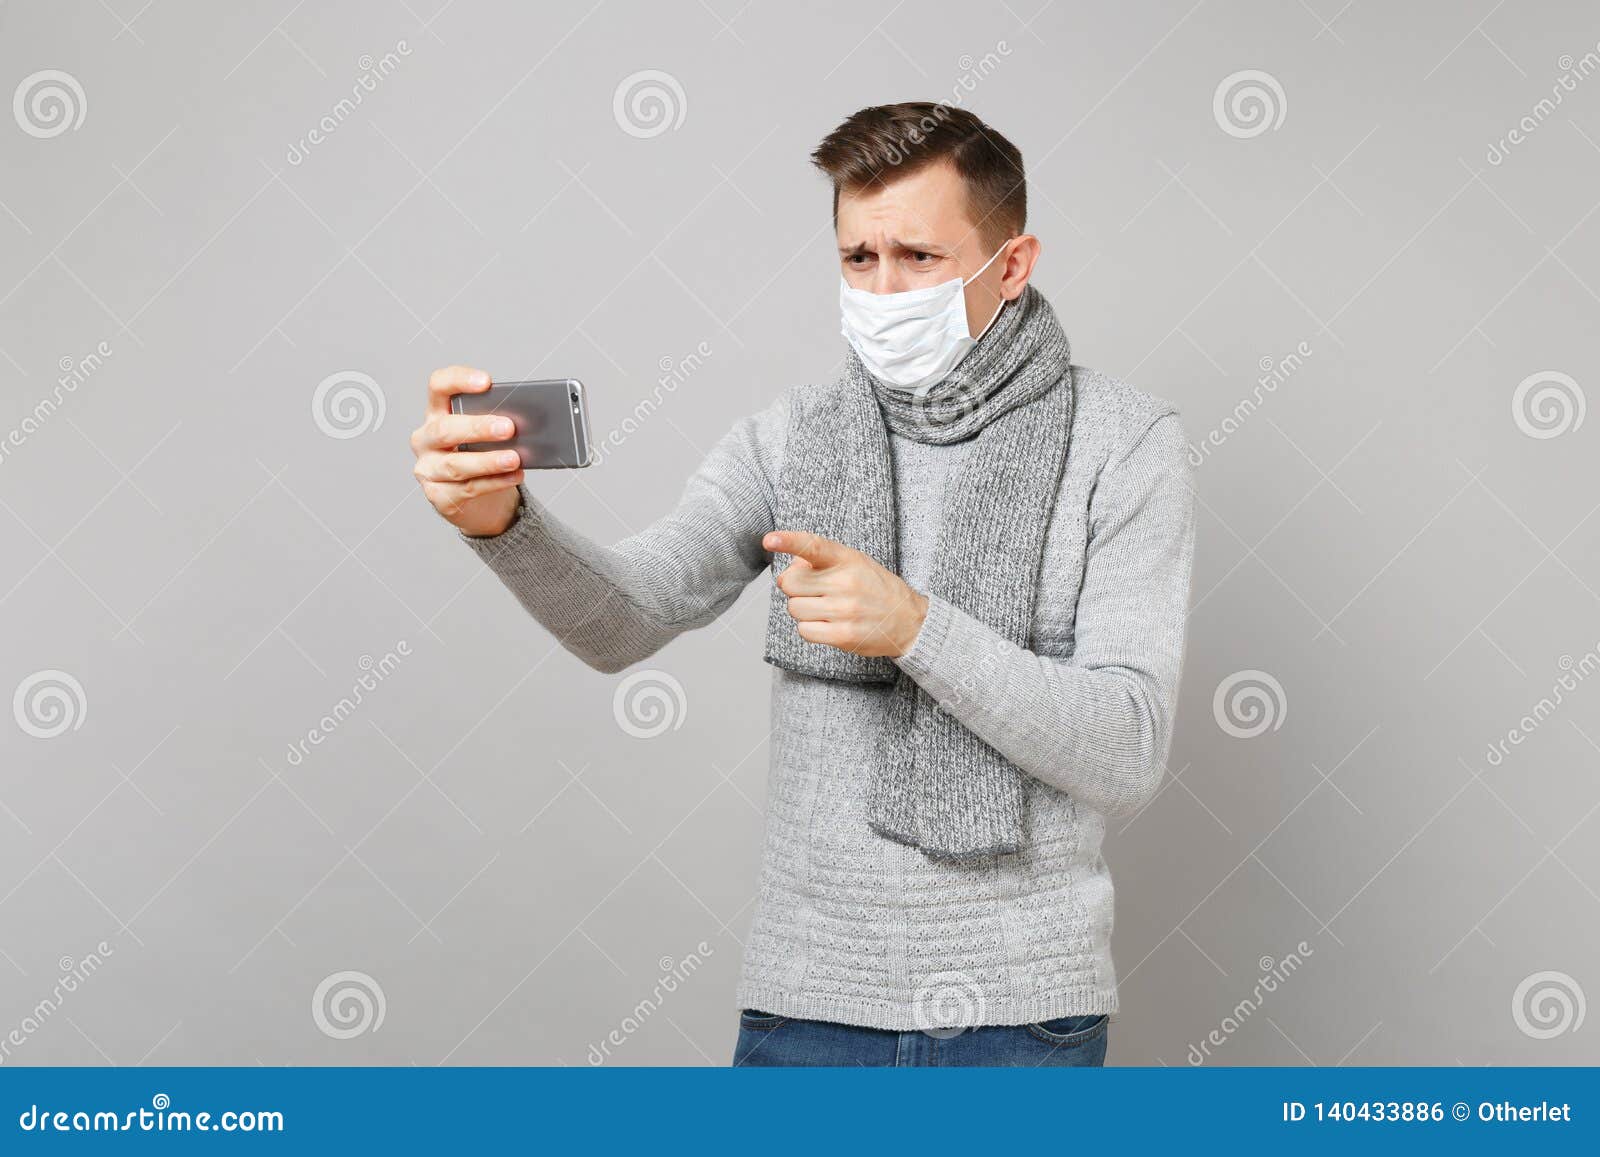 Preoccupied Young Man in Sweater, Scarf Sterile Face Mask Making Video Call  with Mobile Phone Pointing Index Finger Stock Photo - Image of clean,  people: 140433886